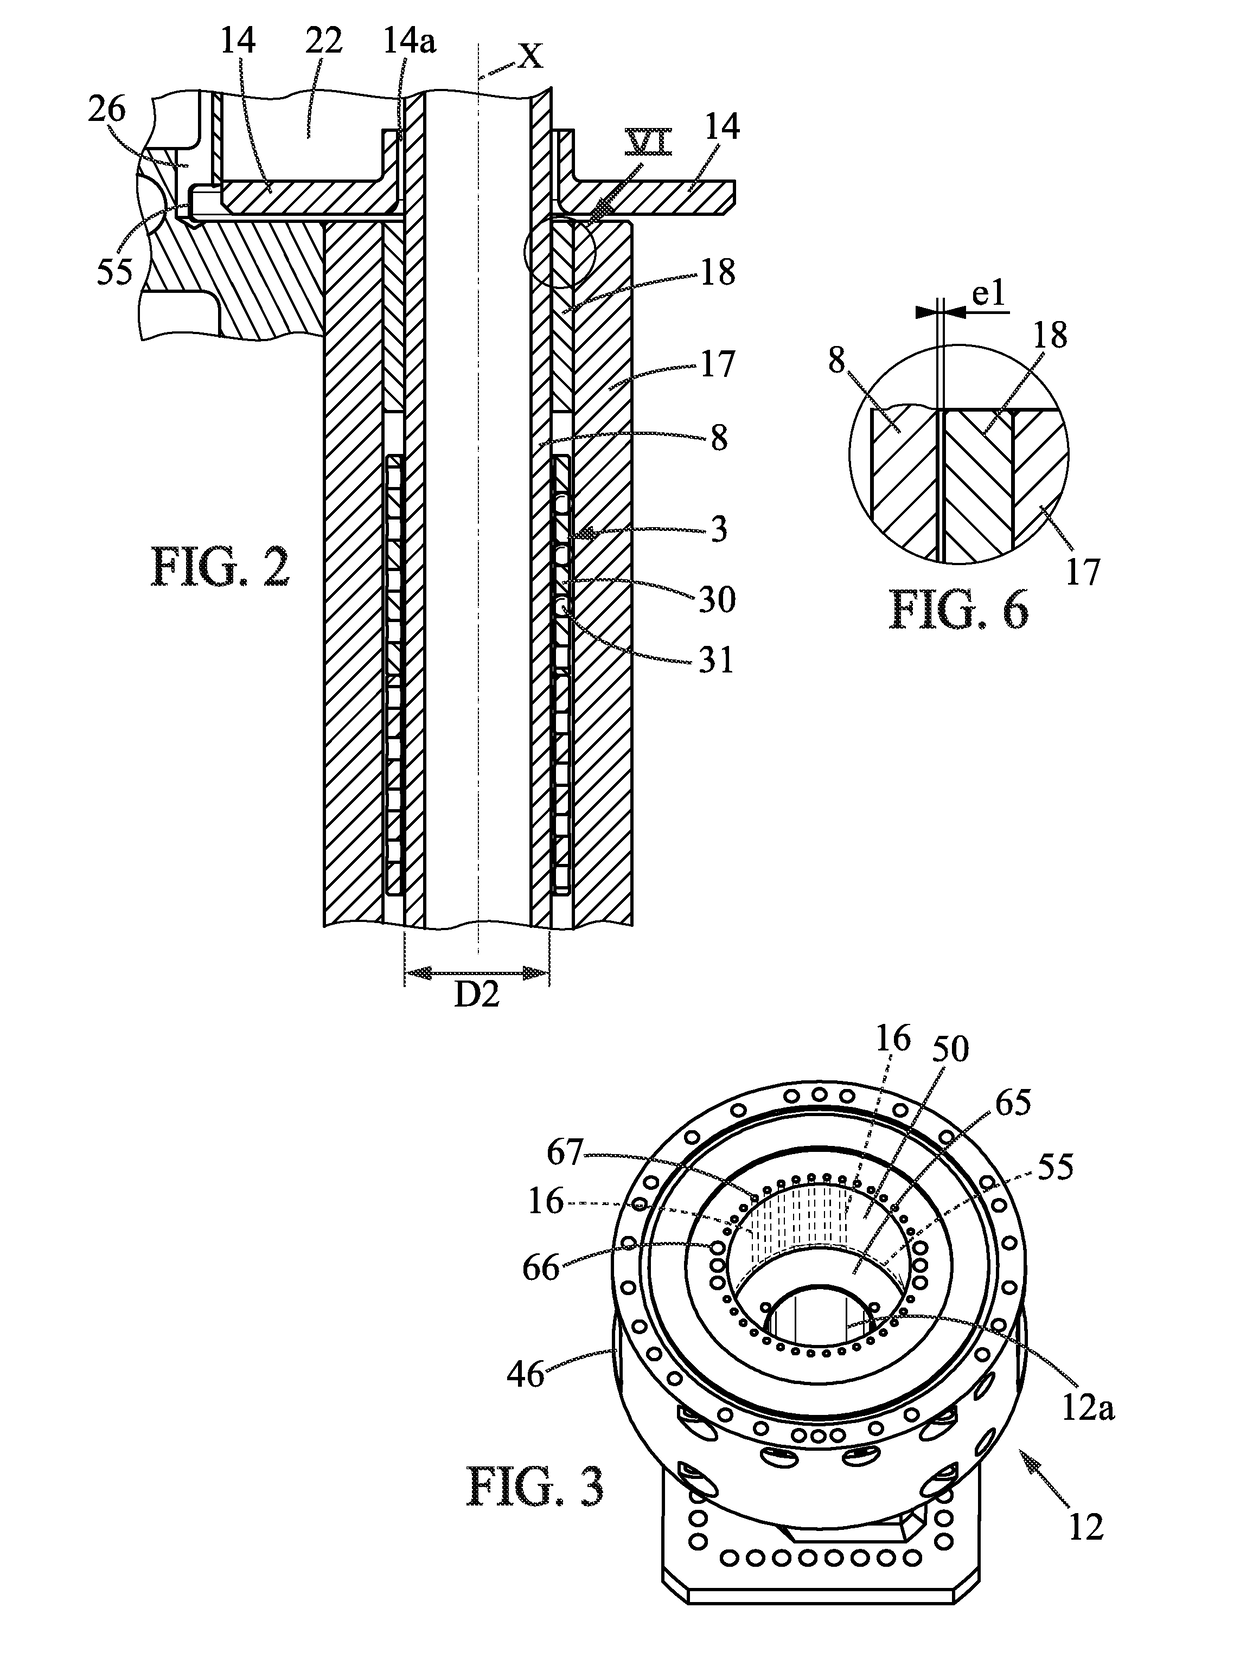 Device for thermal compression of a gaseous fluid